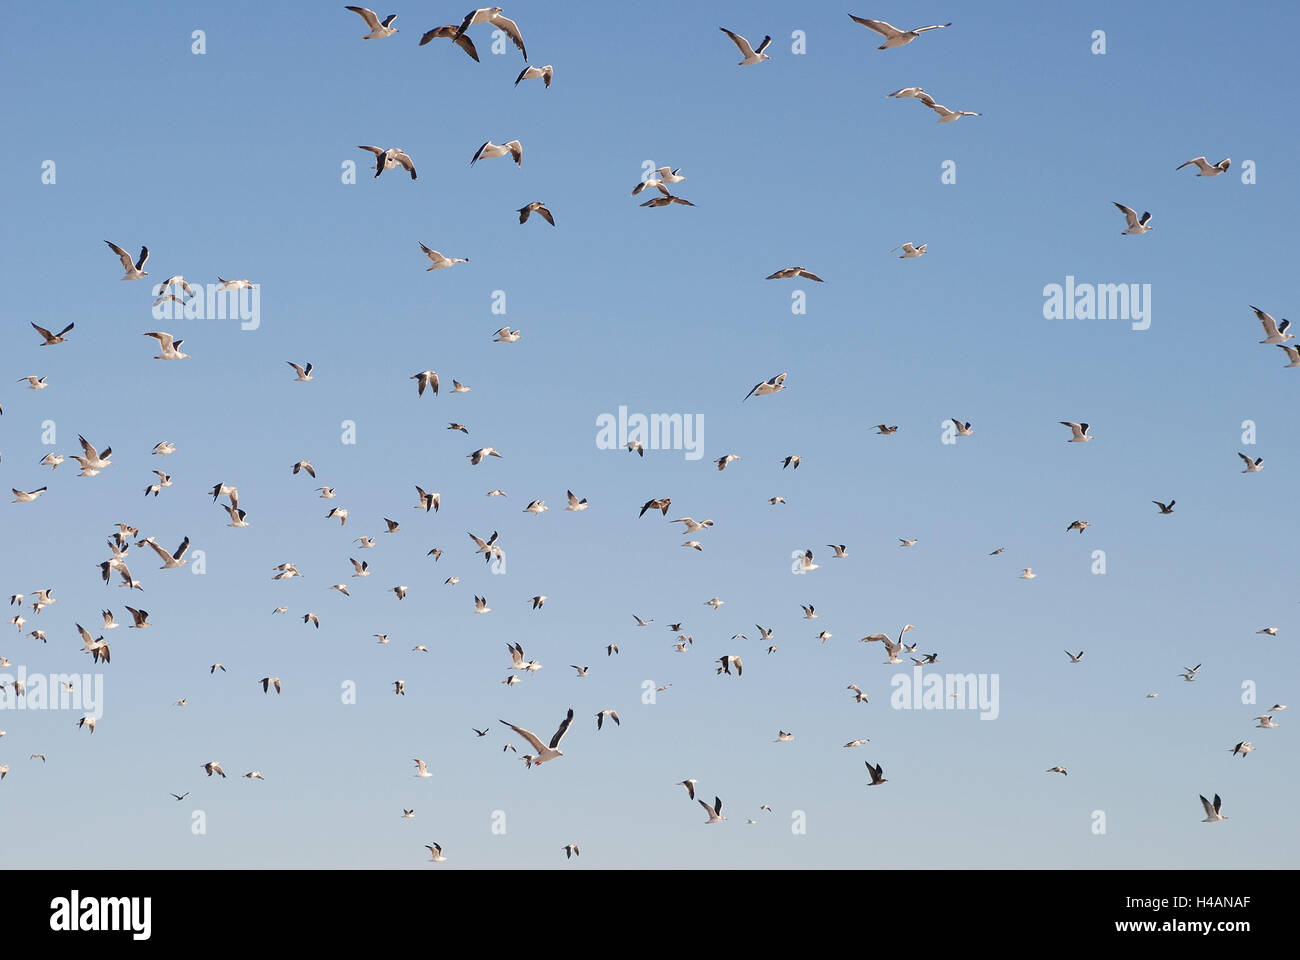 Flock of birds, gulls, sky, animals, birds, flock, many, flying, flight, freedom, free, air, together, wings, flapping of wings, motion, starting, Laridae, flock of gulls, Stock Photo